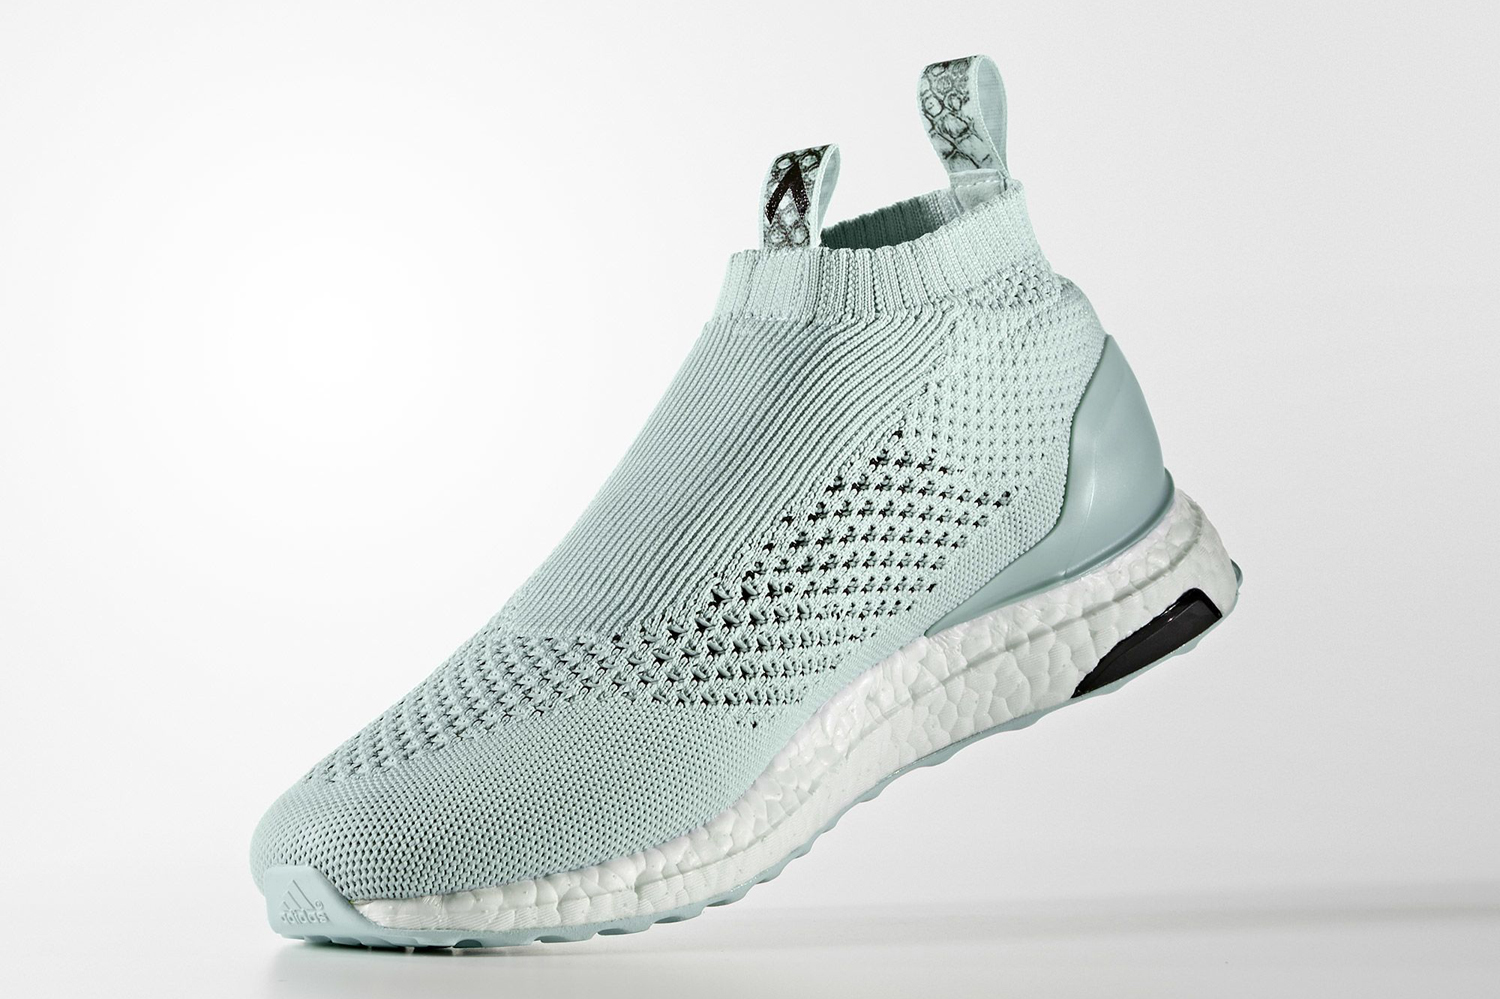 adidas Ace 16 PureControl Ultra Boost Blue Green Medial BY1599